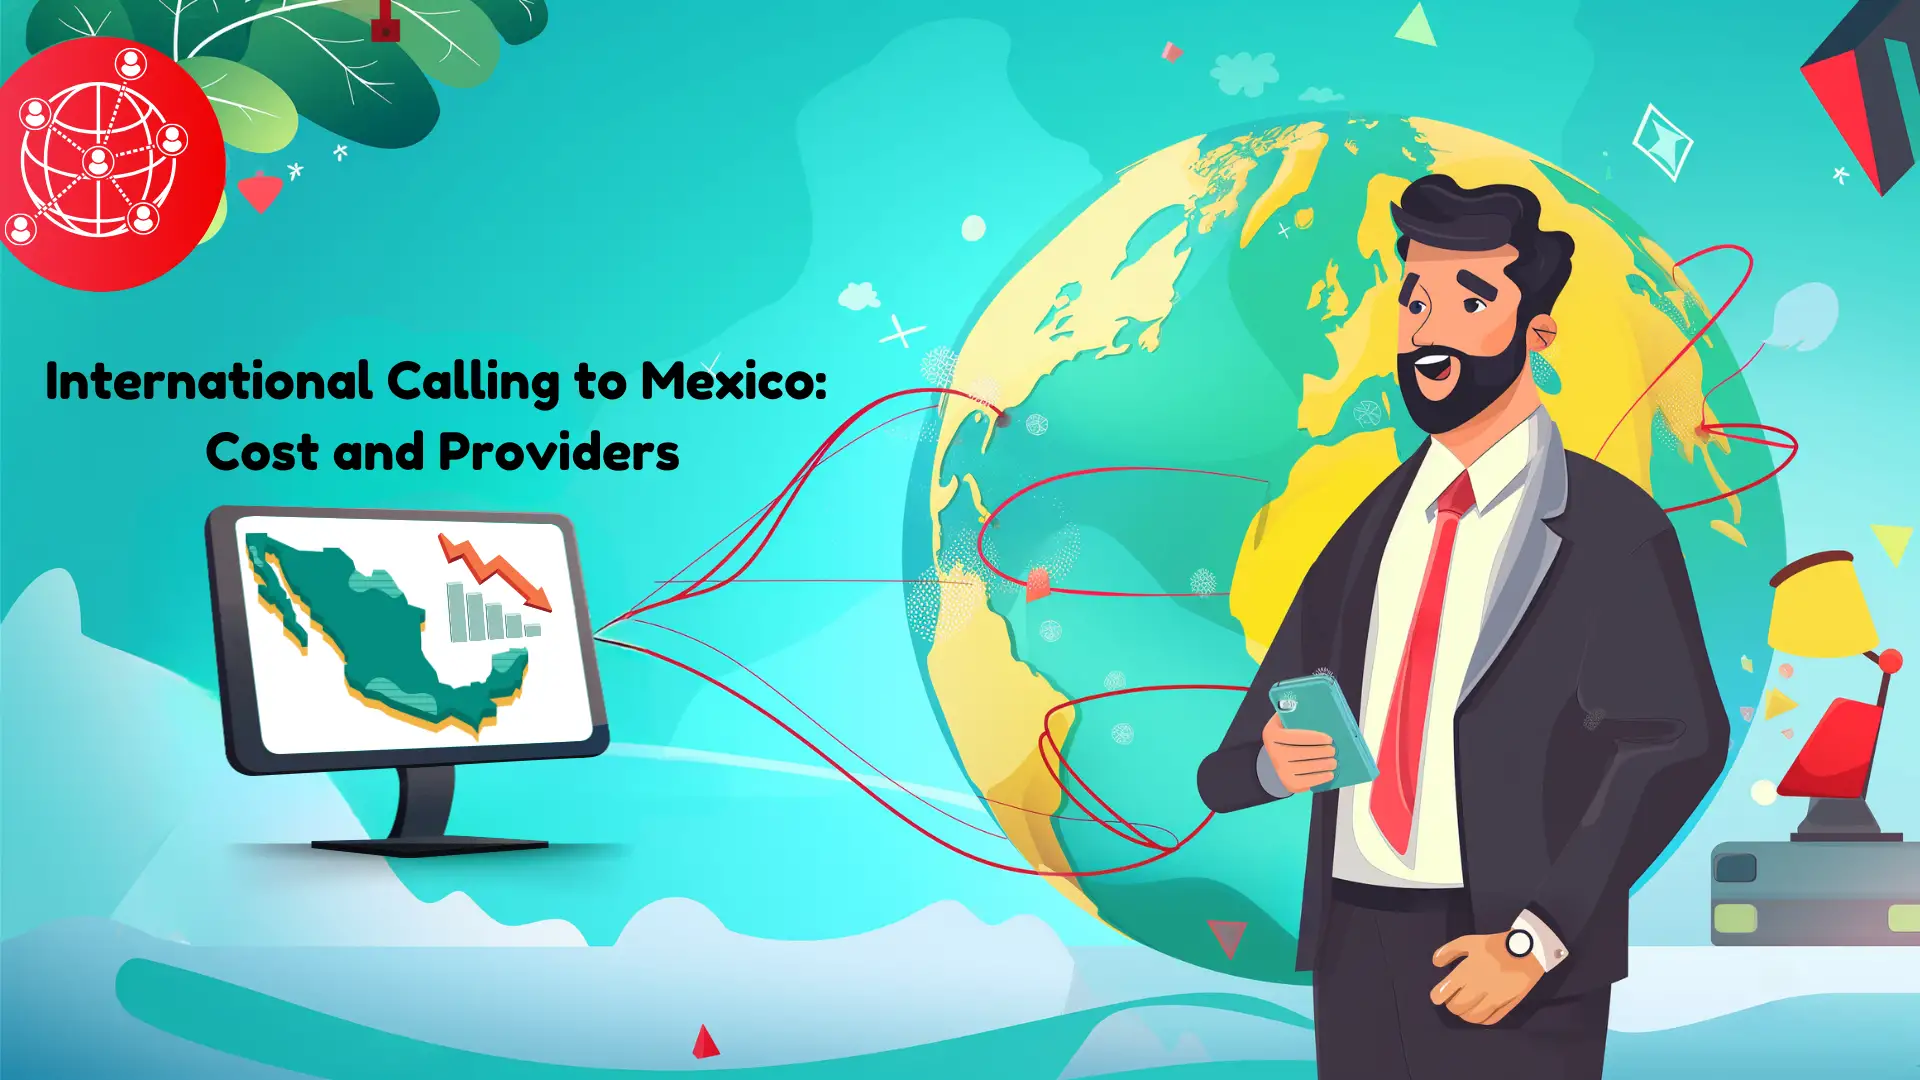 International Calling to Mexico: Cost and Providers